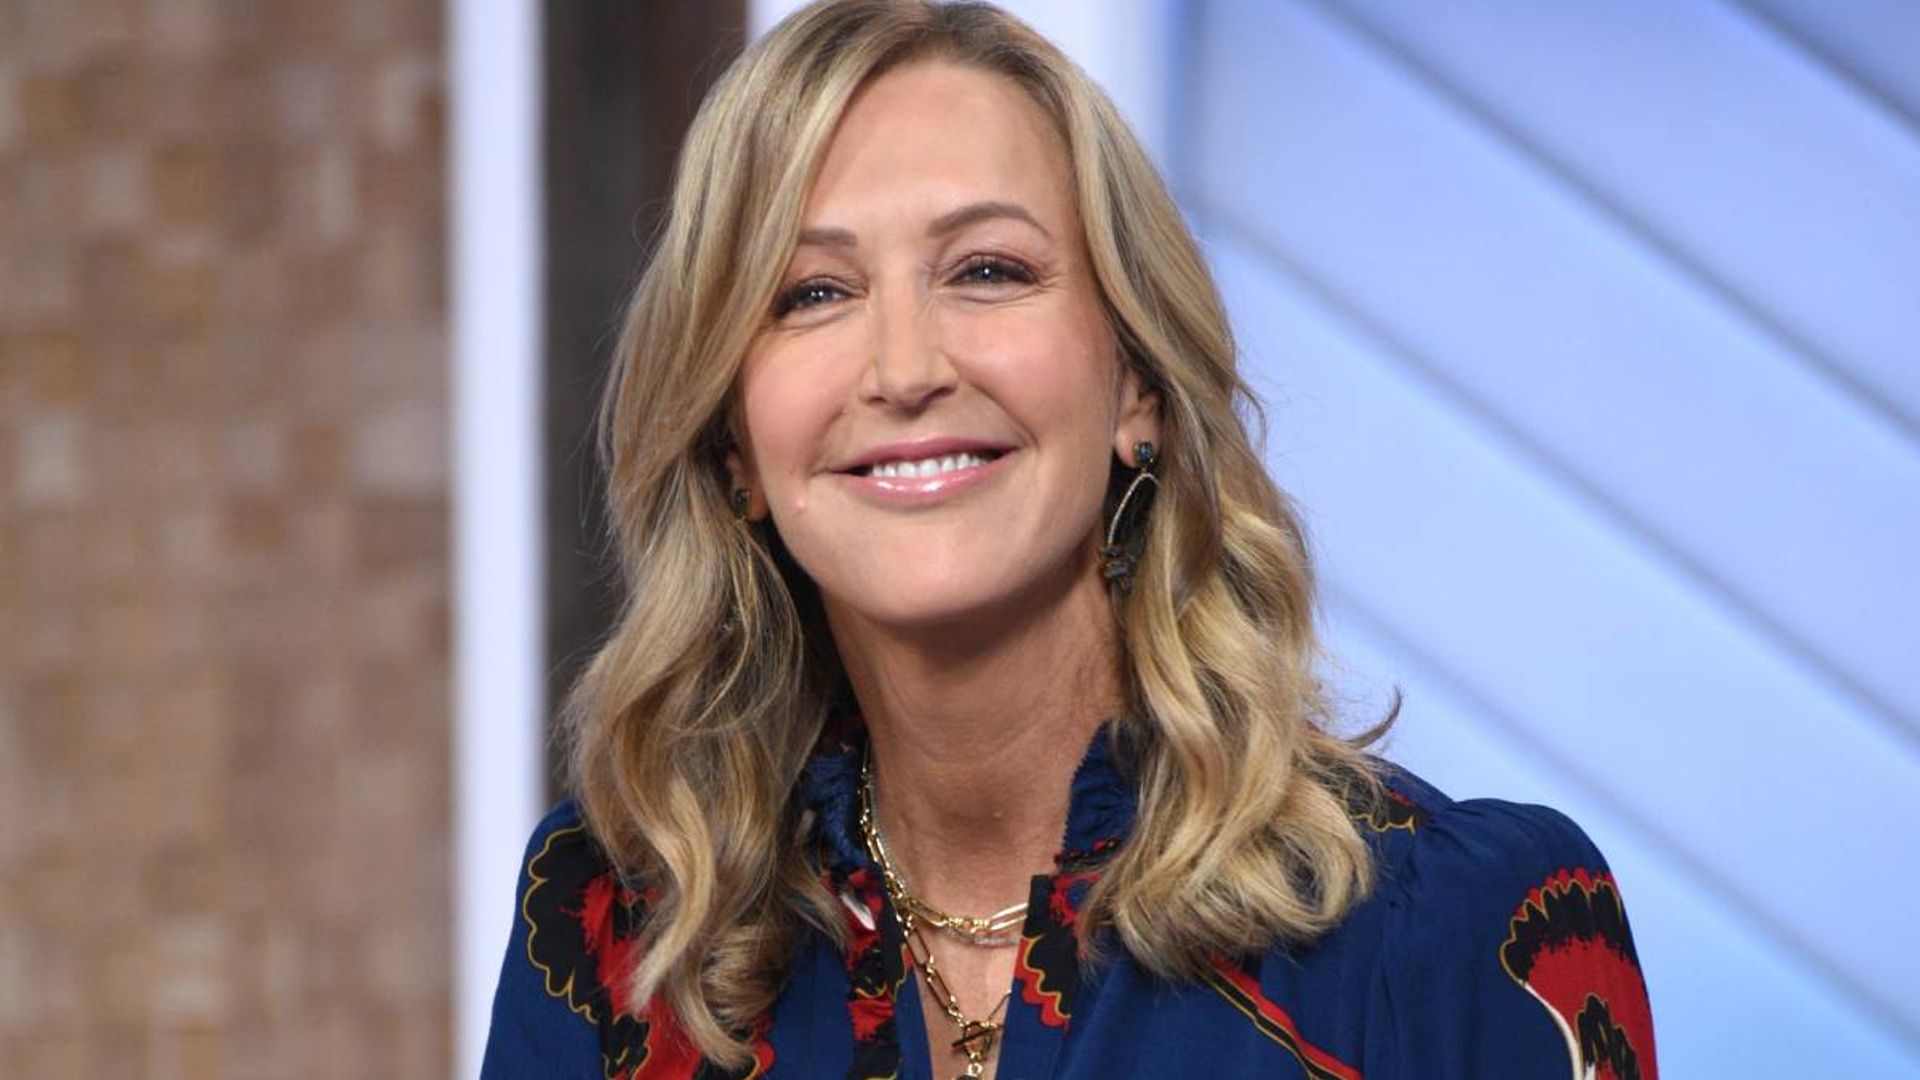 Good Morning America's Lara Spencer Just Gave Us an Exciting Life Update